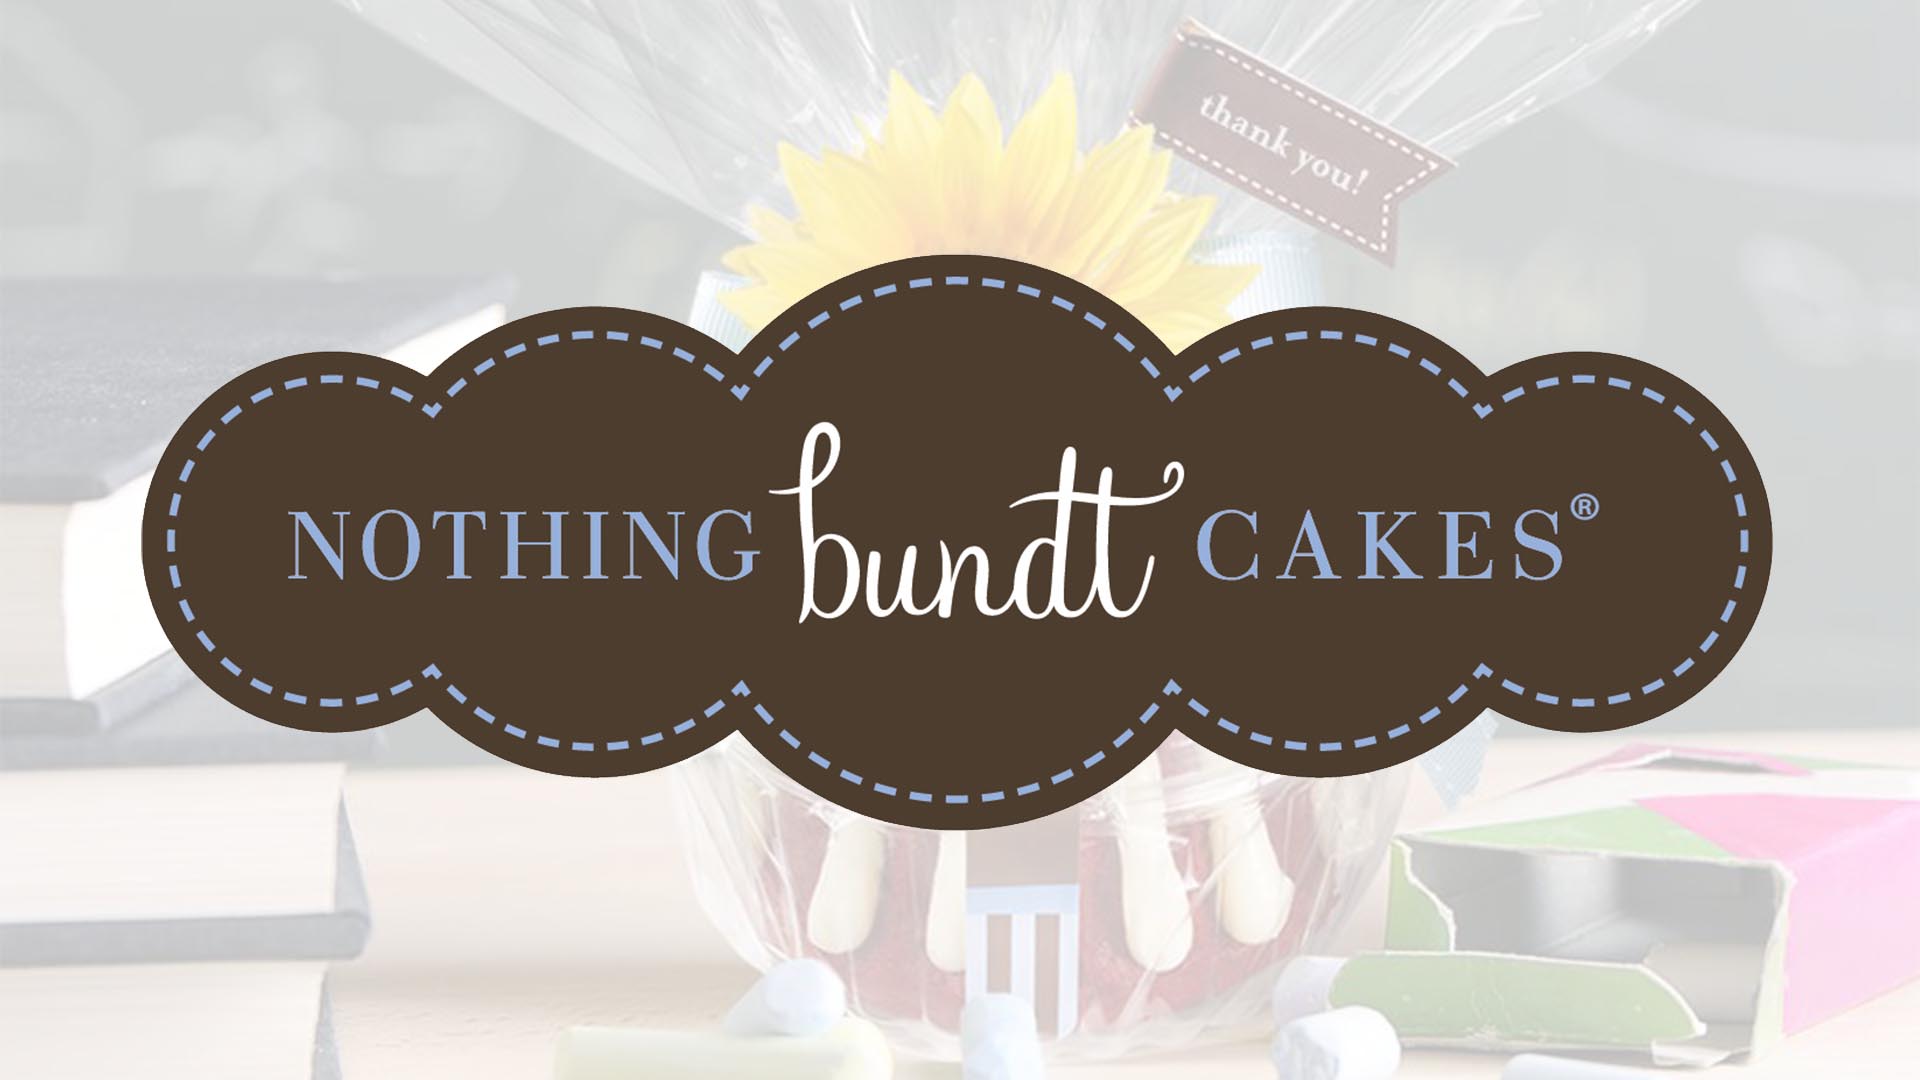 Nothing Bundt Cakes Annapolis | Wedding Cakes - The Knot